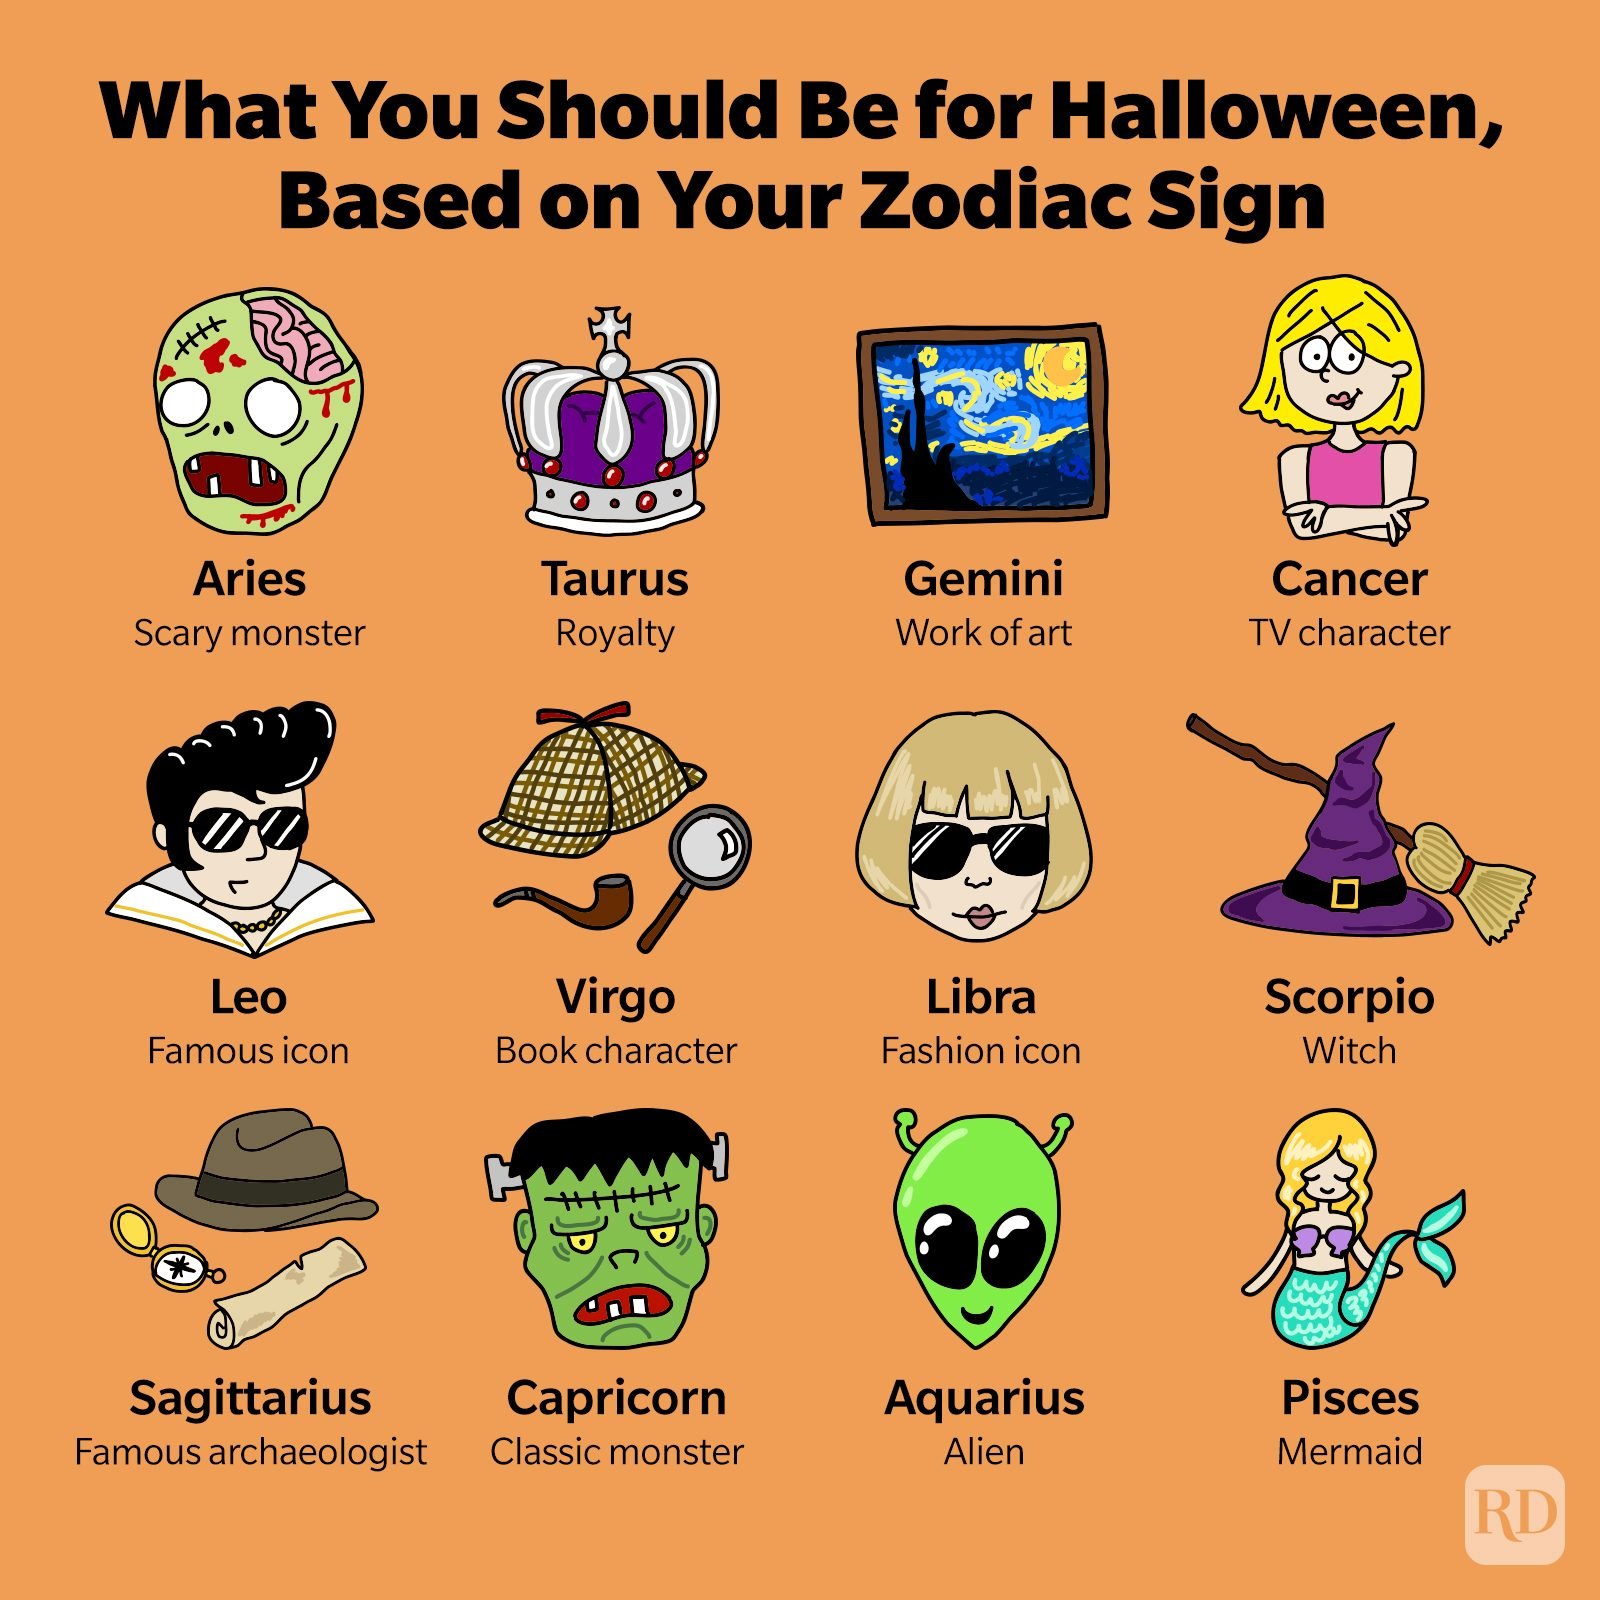 Halloween Zodiac Sign Here's the Best Costume for Your Zodiac Sign